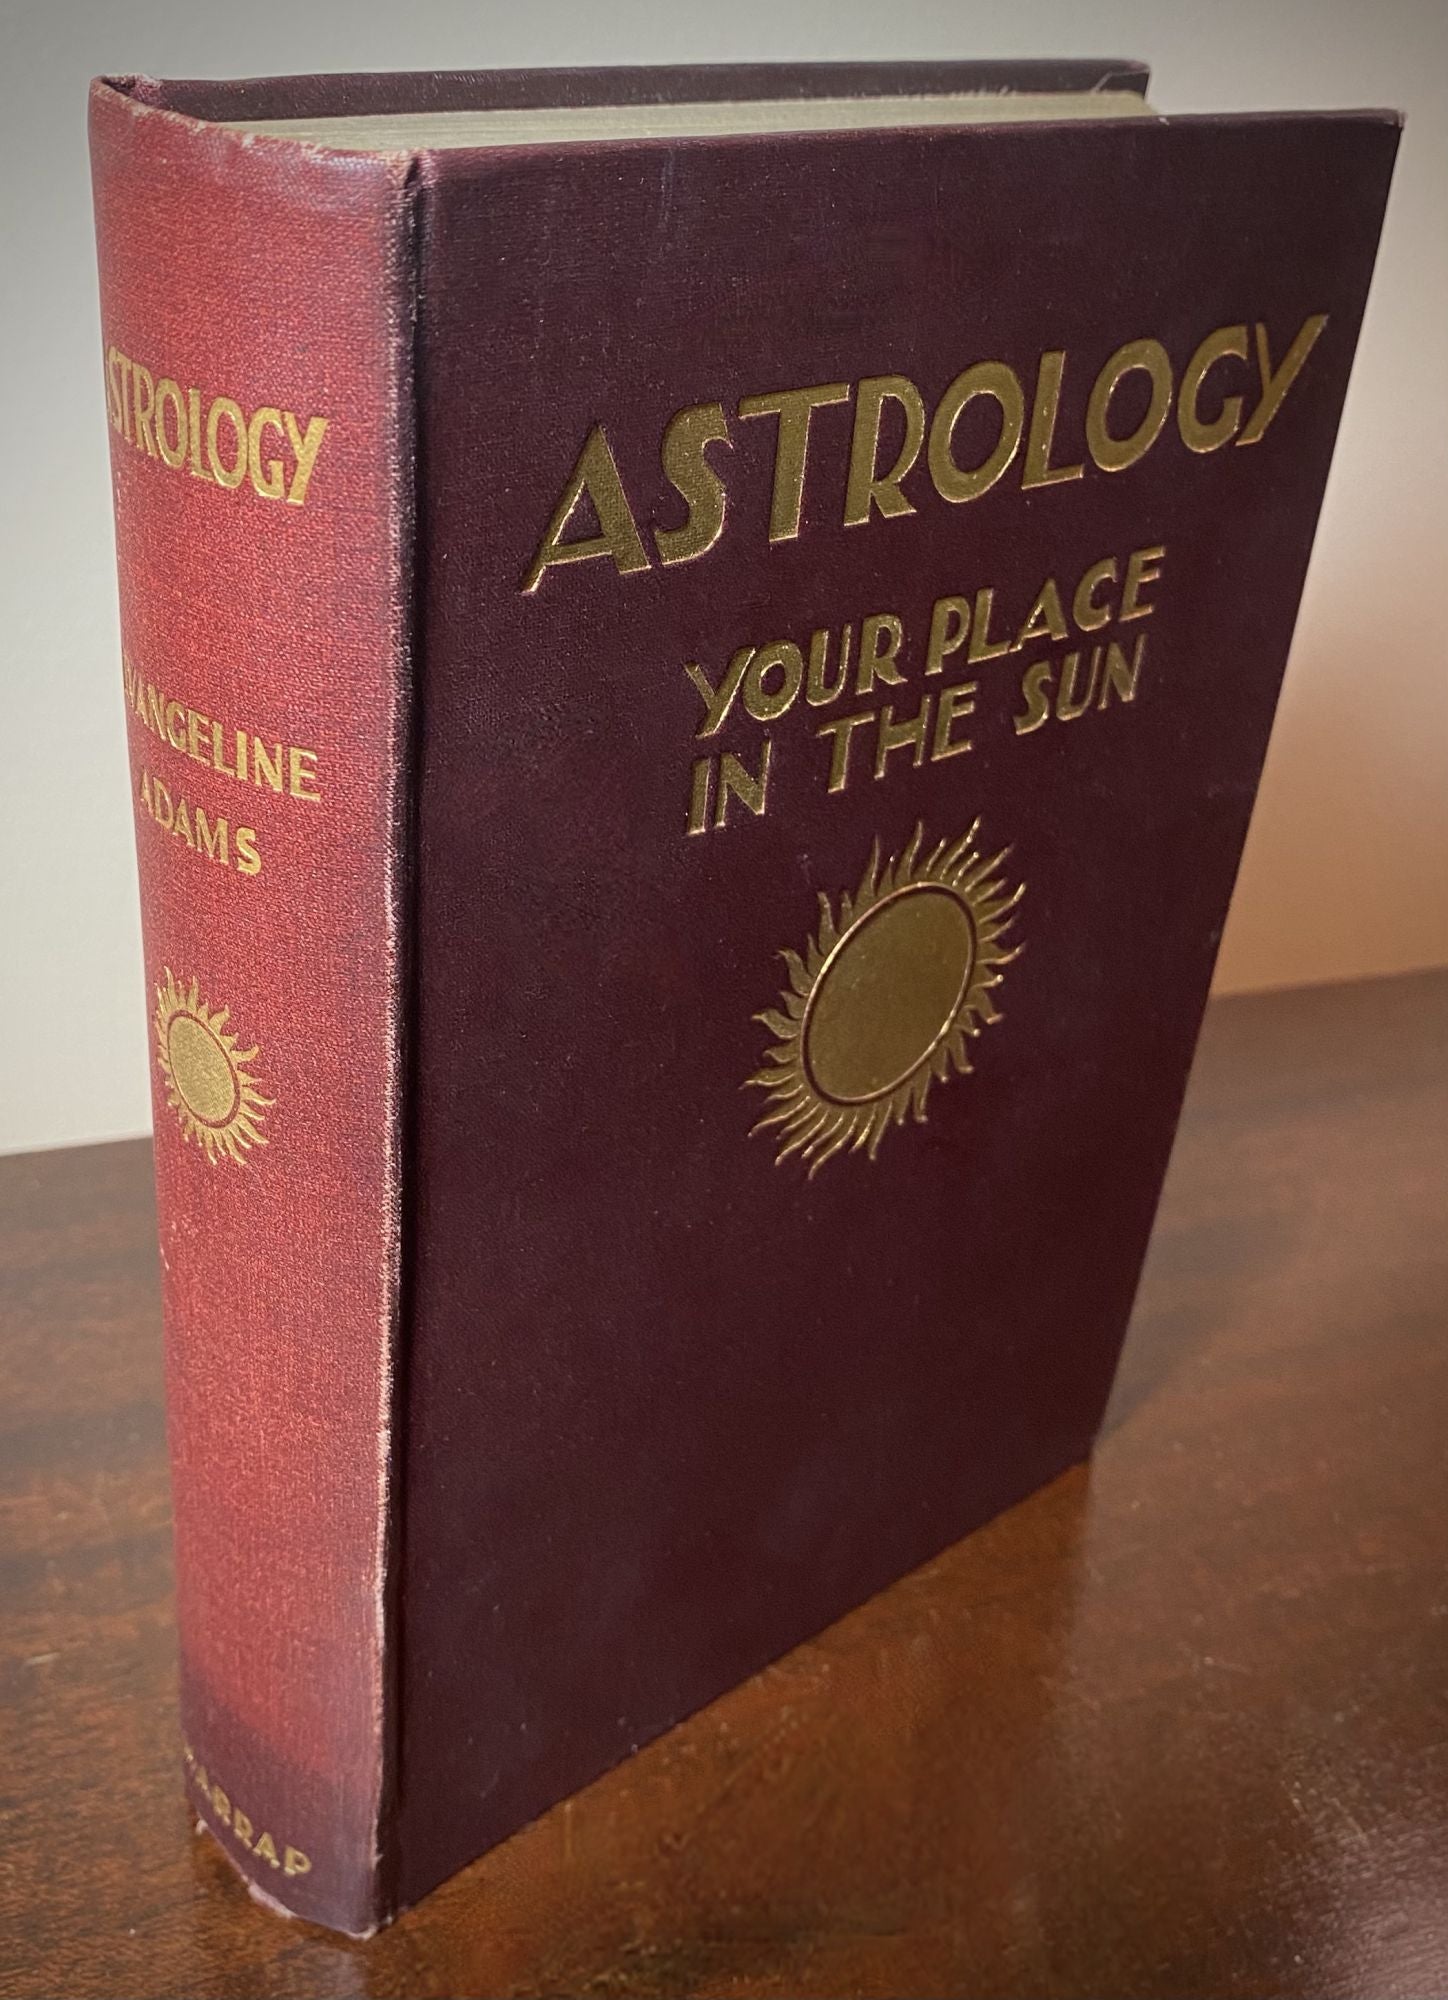 Adams, Evangeline - Astrology: Your Place in the Sun [with Errata Slip]